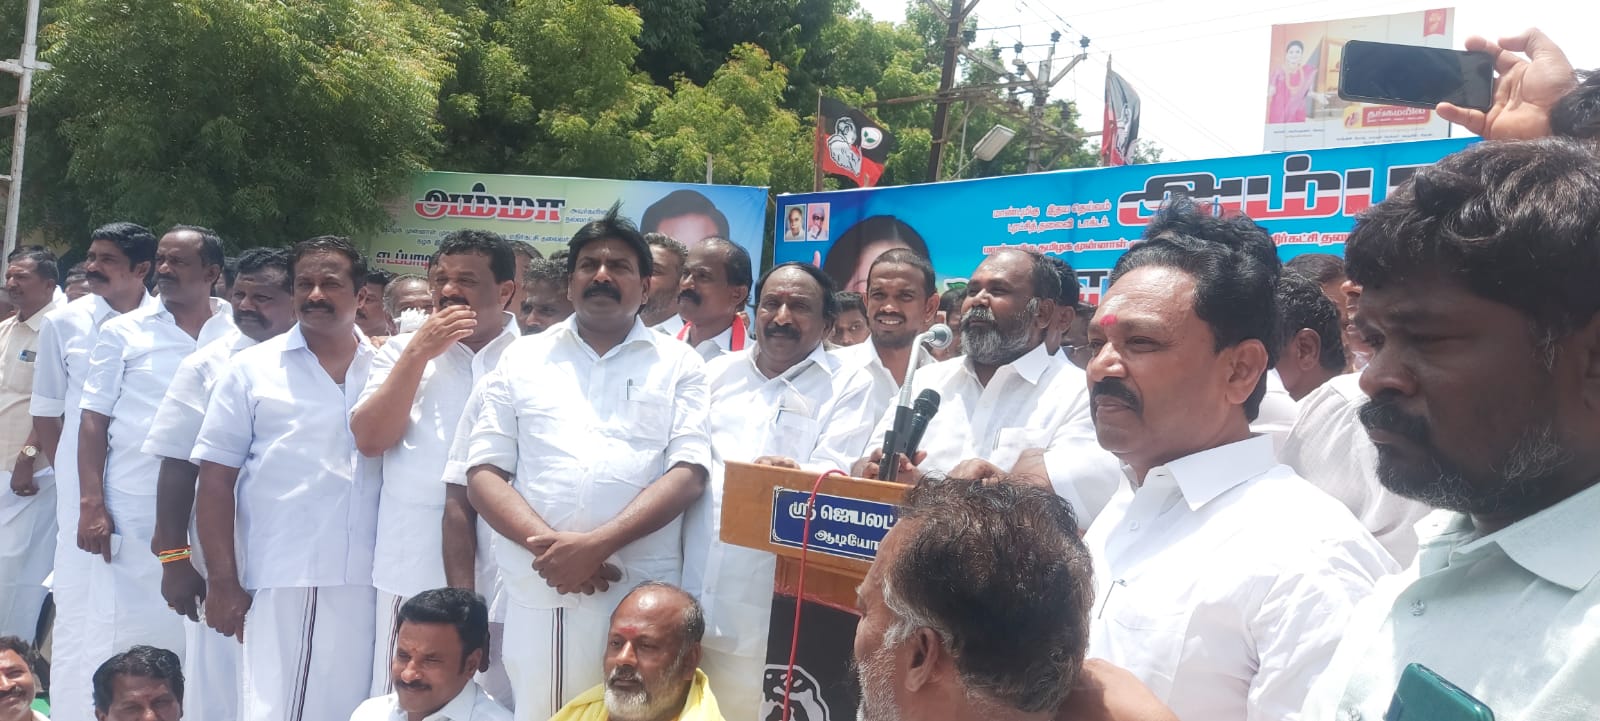 In Theni AIADMK members protested against the increase in electricity tariff and the law and order disorder